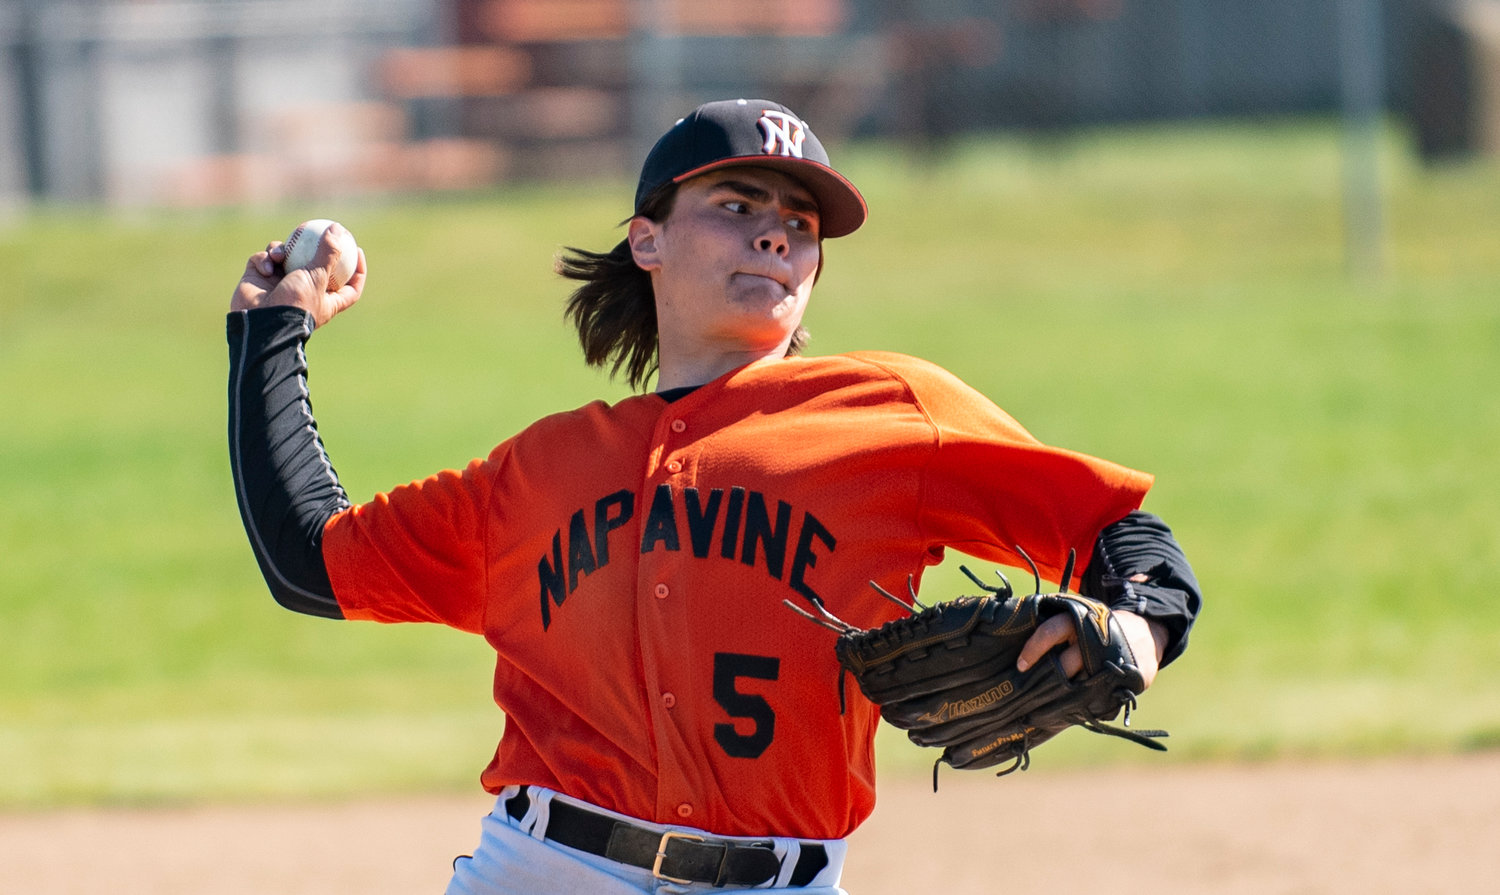 Napavine junior pitcher Gavin Parker delivers a pitch to a Kalama batter on Tuesday at home.